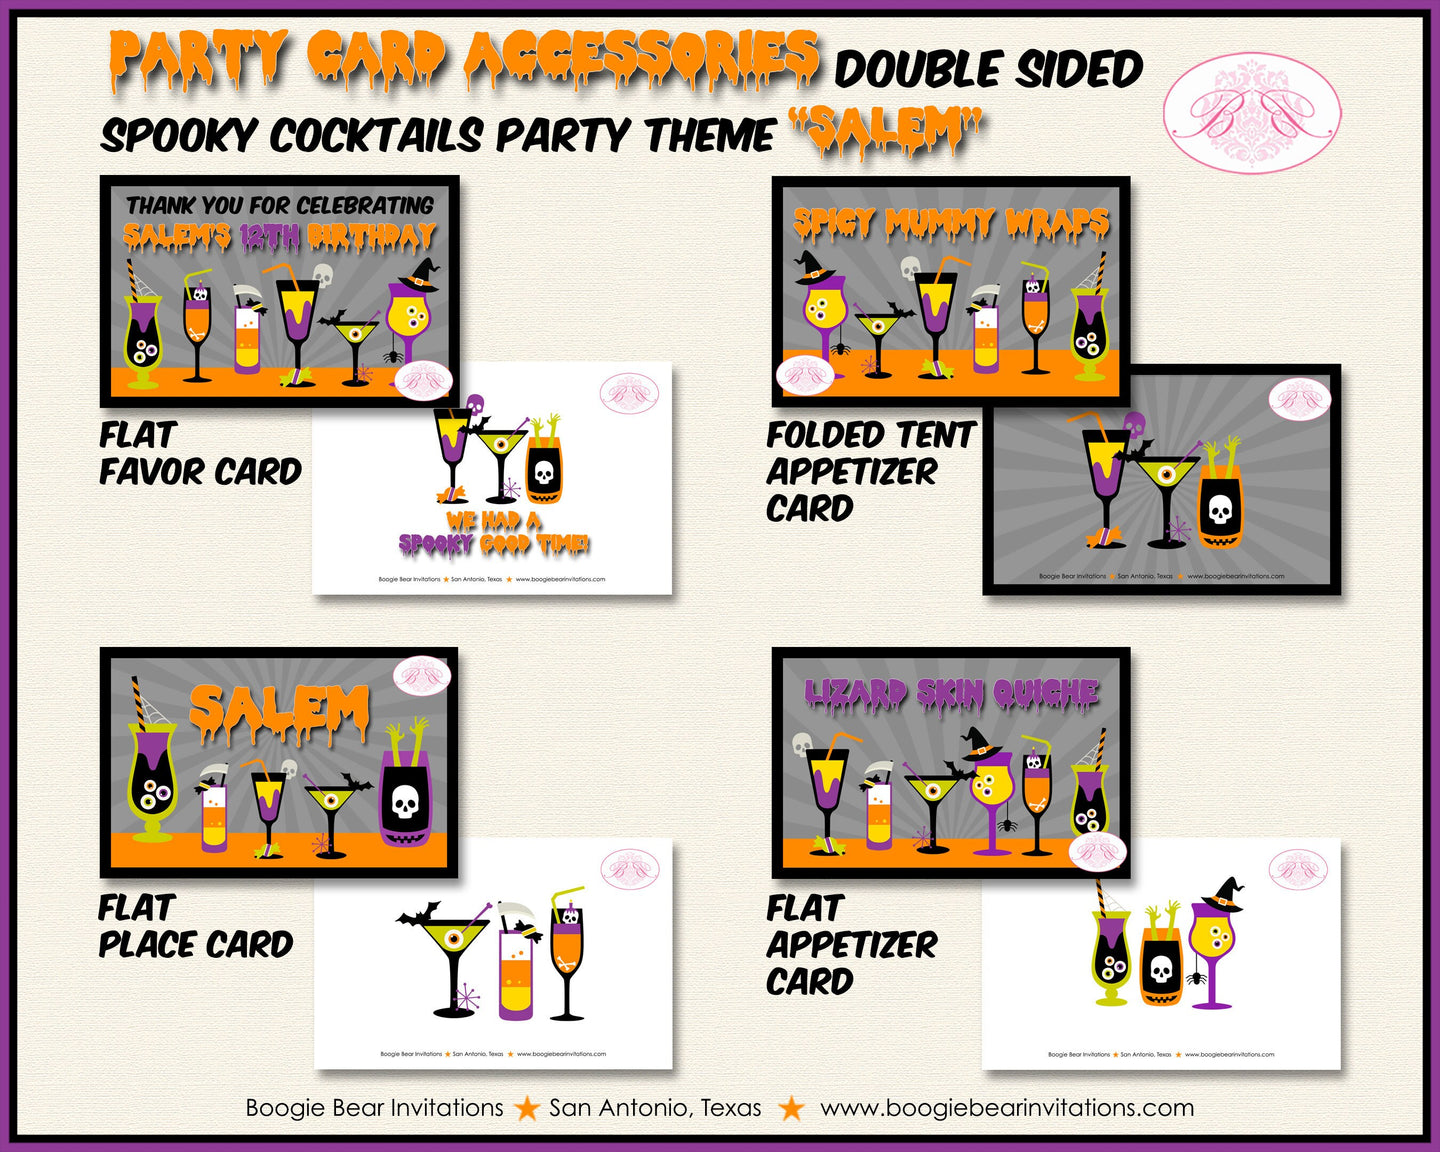 Spooky Cocktails Birthday Favor Party Card Tent Place Food Tag Appetizer Folded Flat Halloween Poison Boogie Bear Invitations Salem Theme